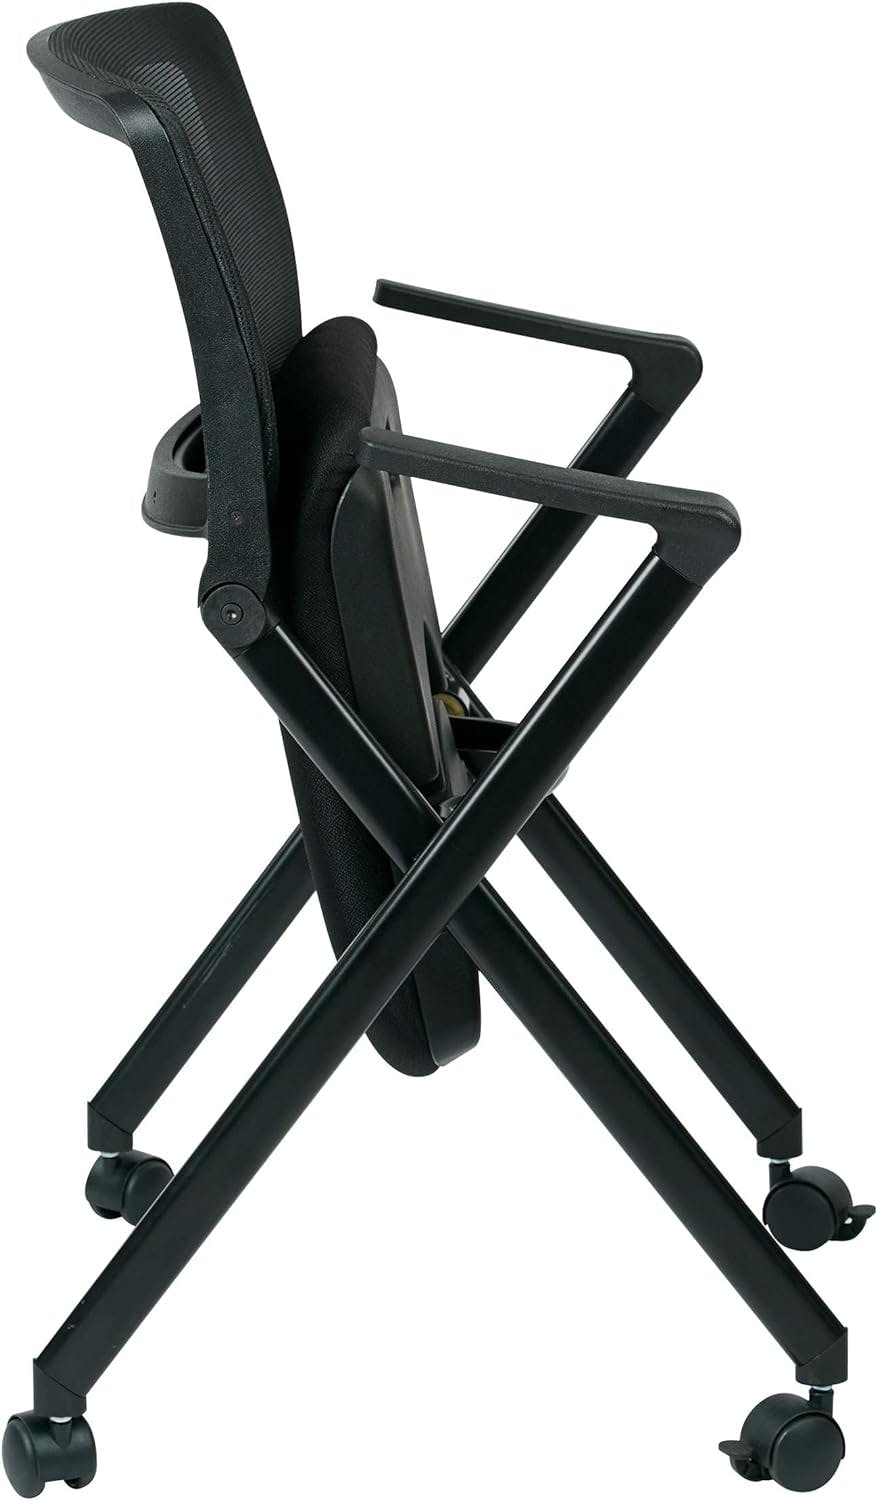 Deluxe Black Mesh and Fabric Folding Office Chair, 22"x36"